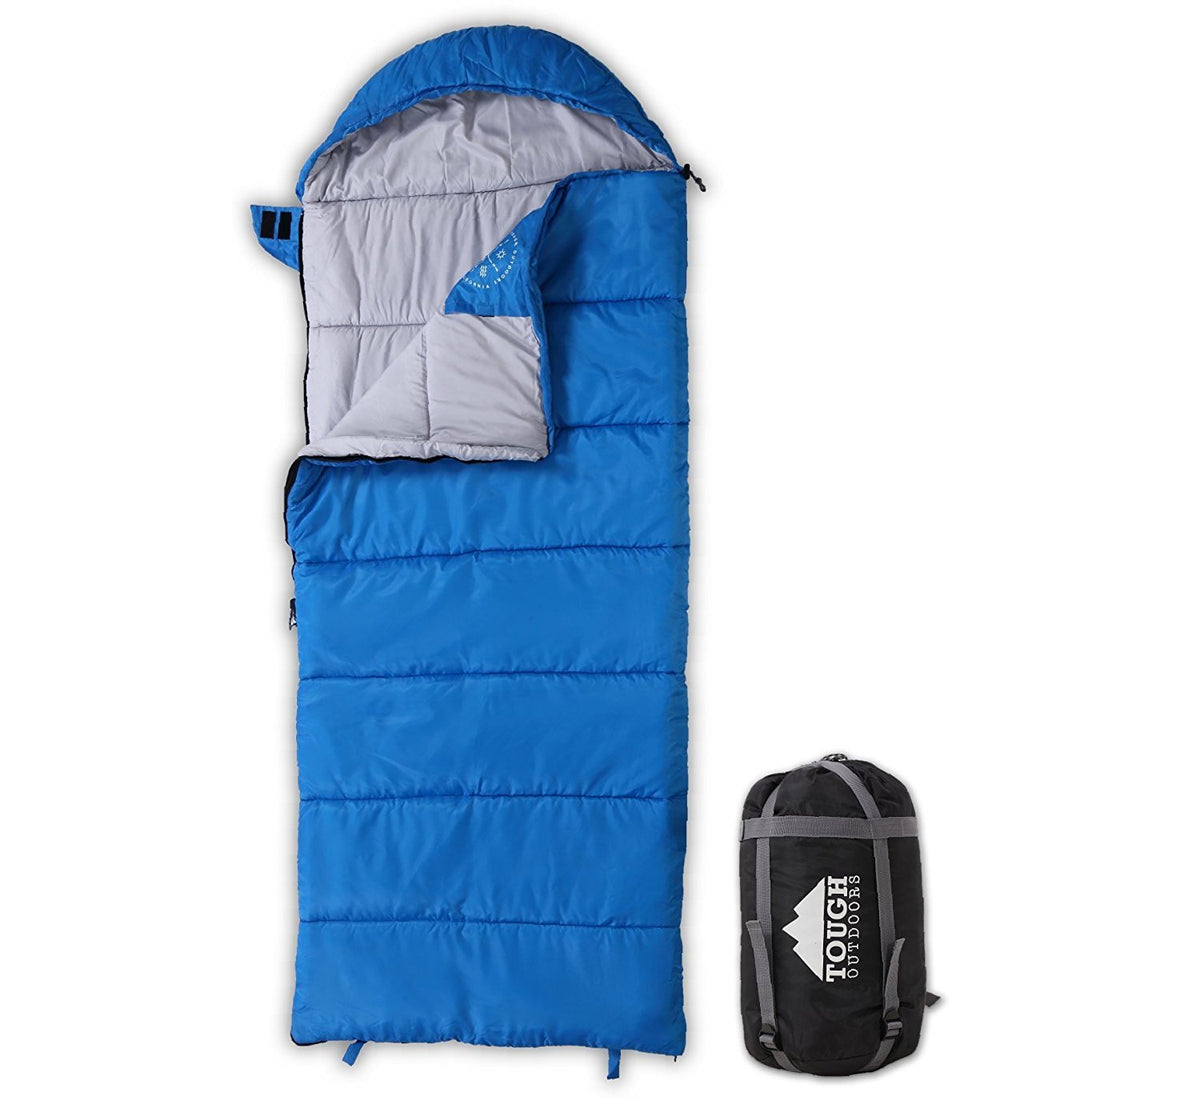 Tough Outdoors Sleeping Bags for Adults & Kids Sleeping Bags Girls Boys  Teens - Camping Sleeping Bag for Backpacking- Cold Warm Weather & Summer